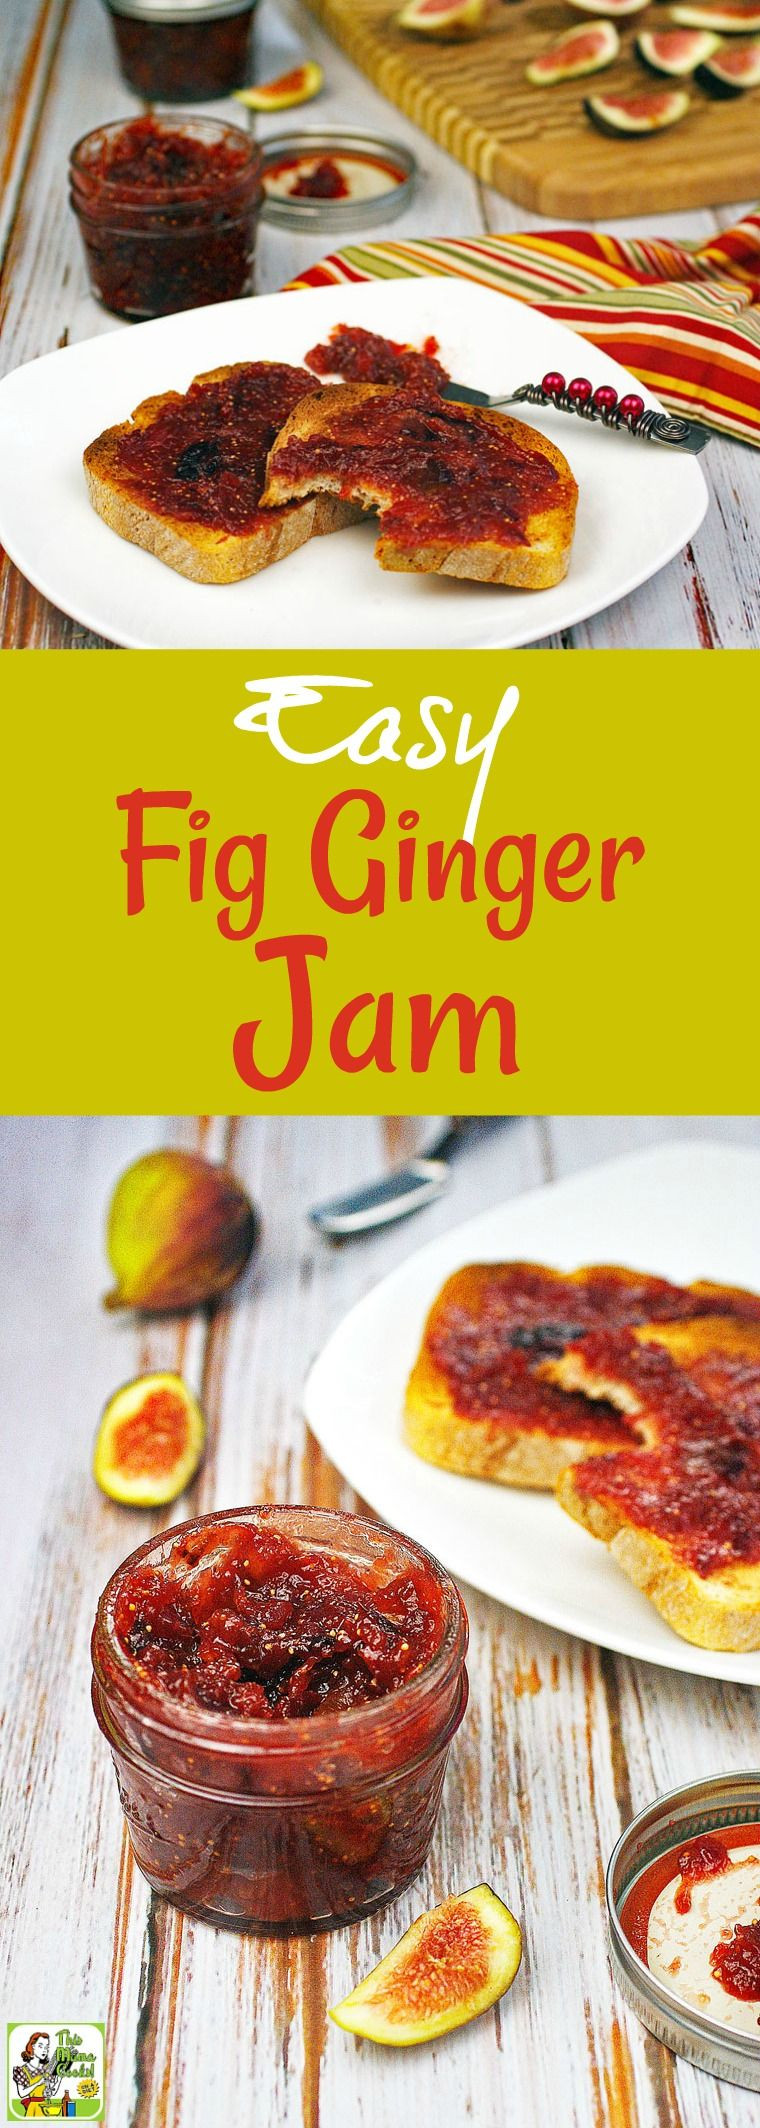 Fresh Fig Recipes Healthy
 How to make an Easy Fig Ginger Jam recipe This easy fresh